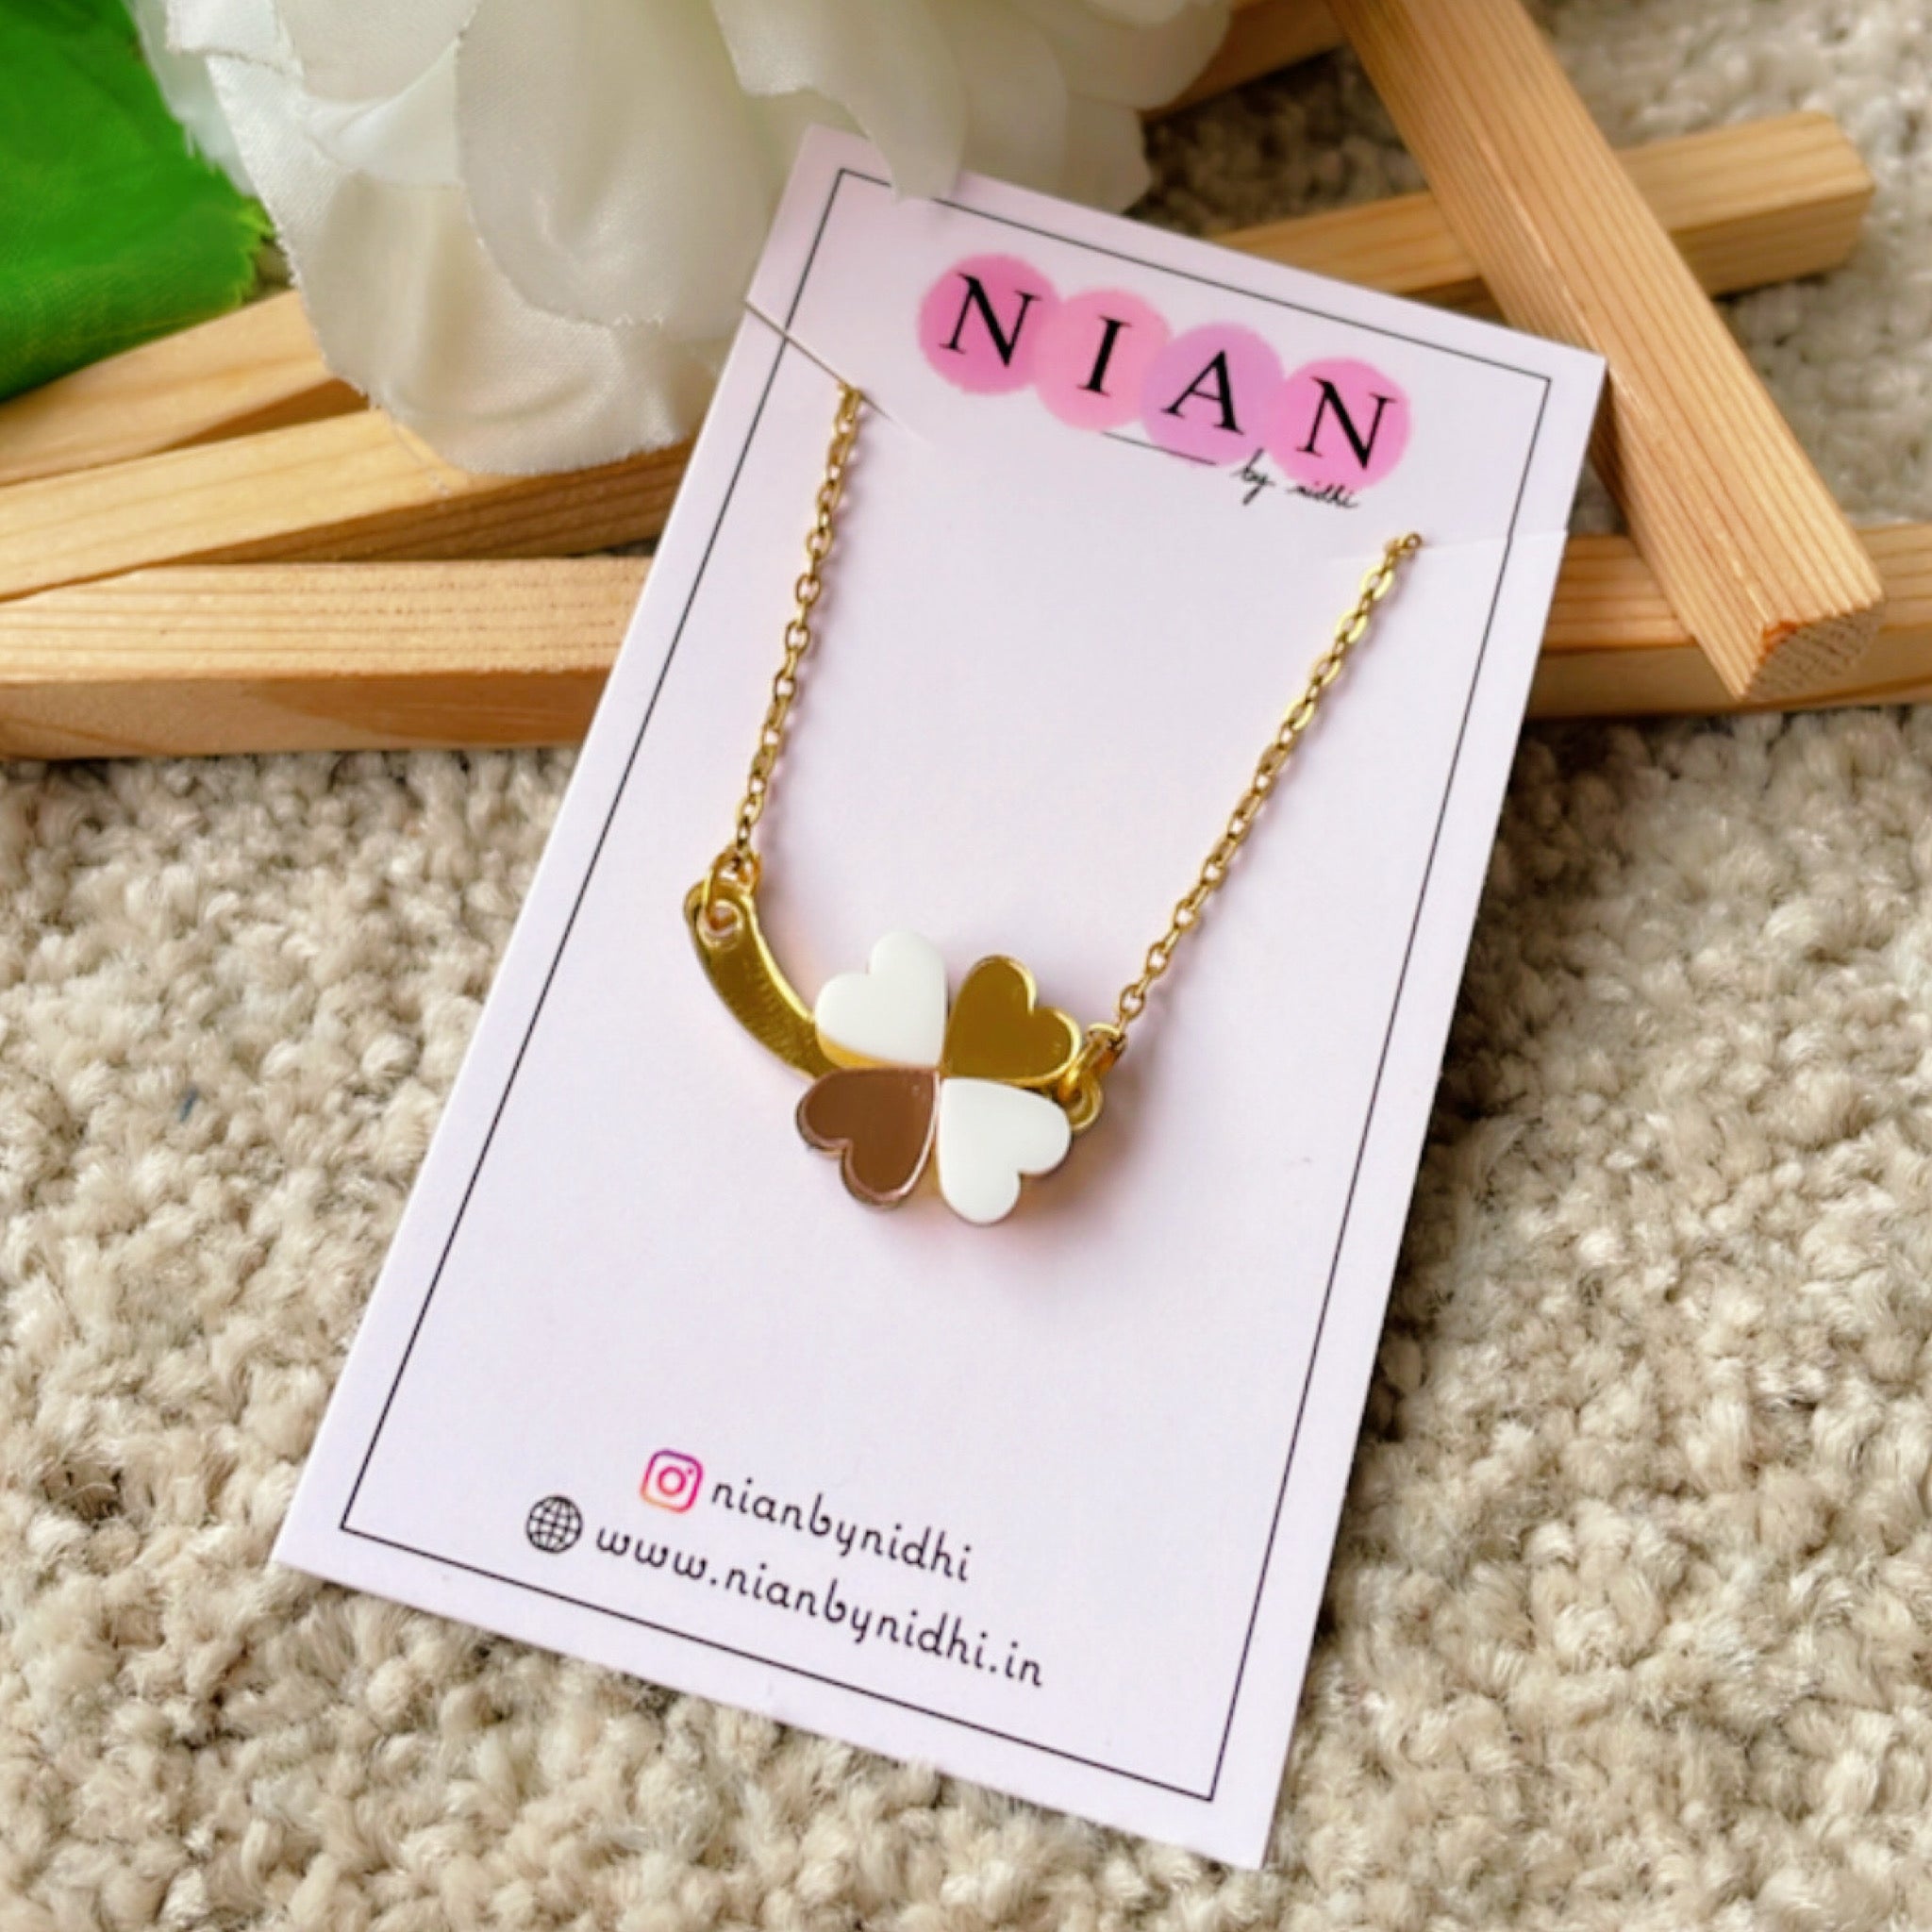 Clover Necklace - White, Rosegold, and Golden - Nian by Nidhi - placed on a Nian by Nidhi product card, in a light beige background